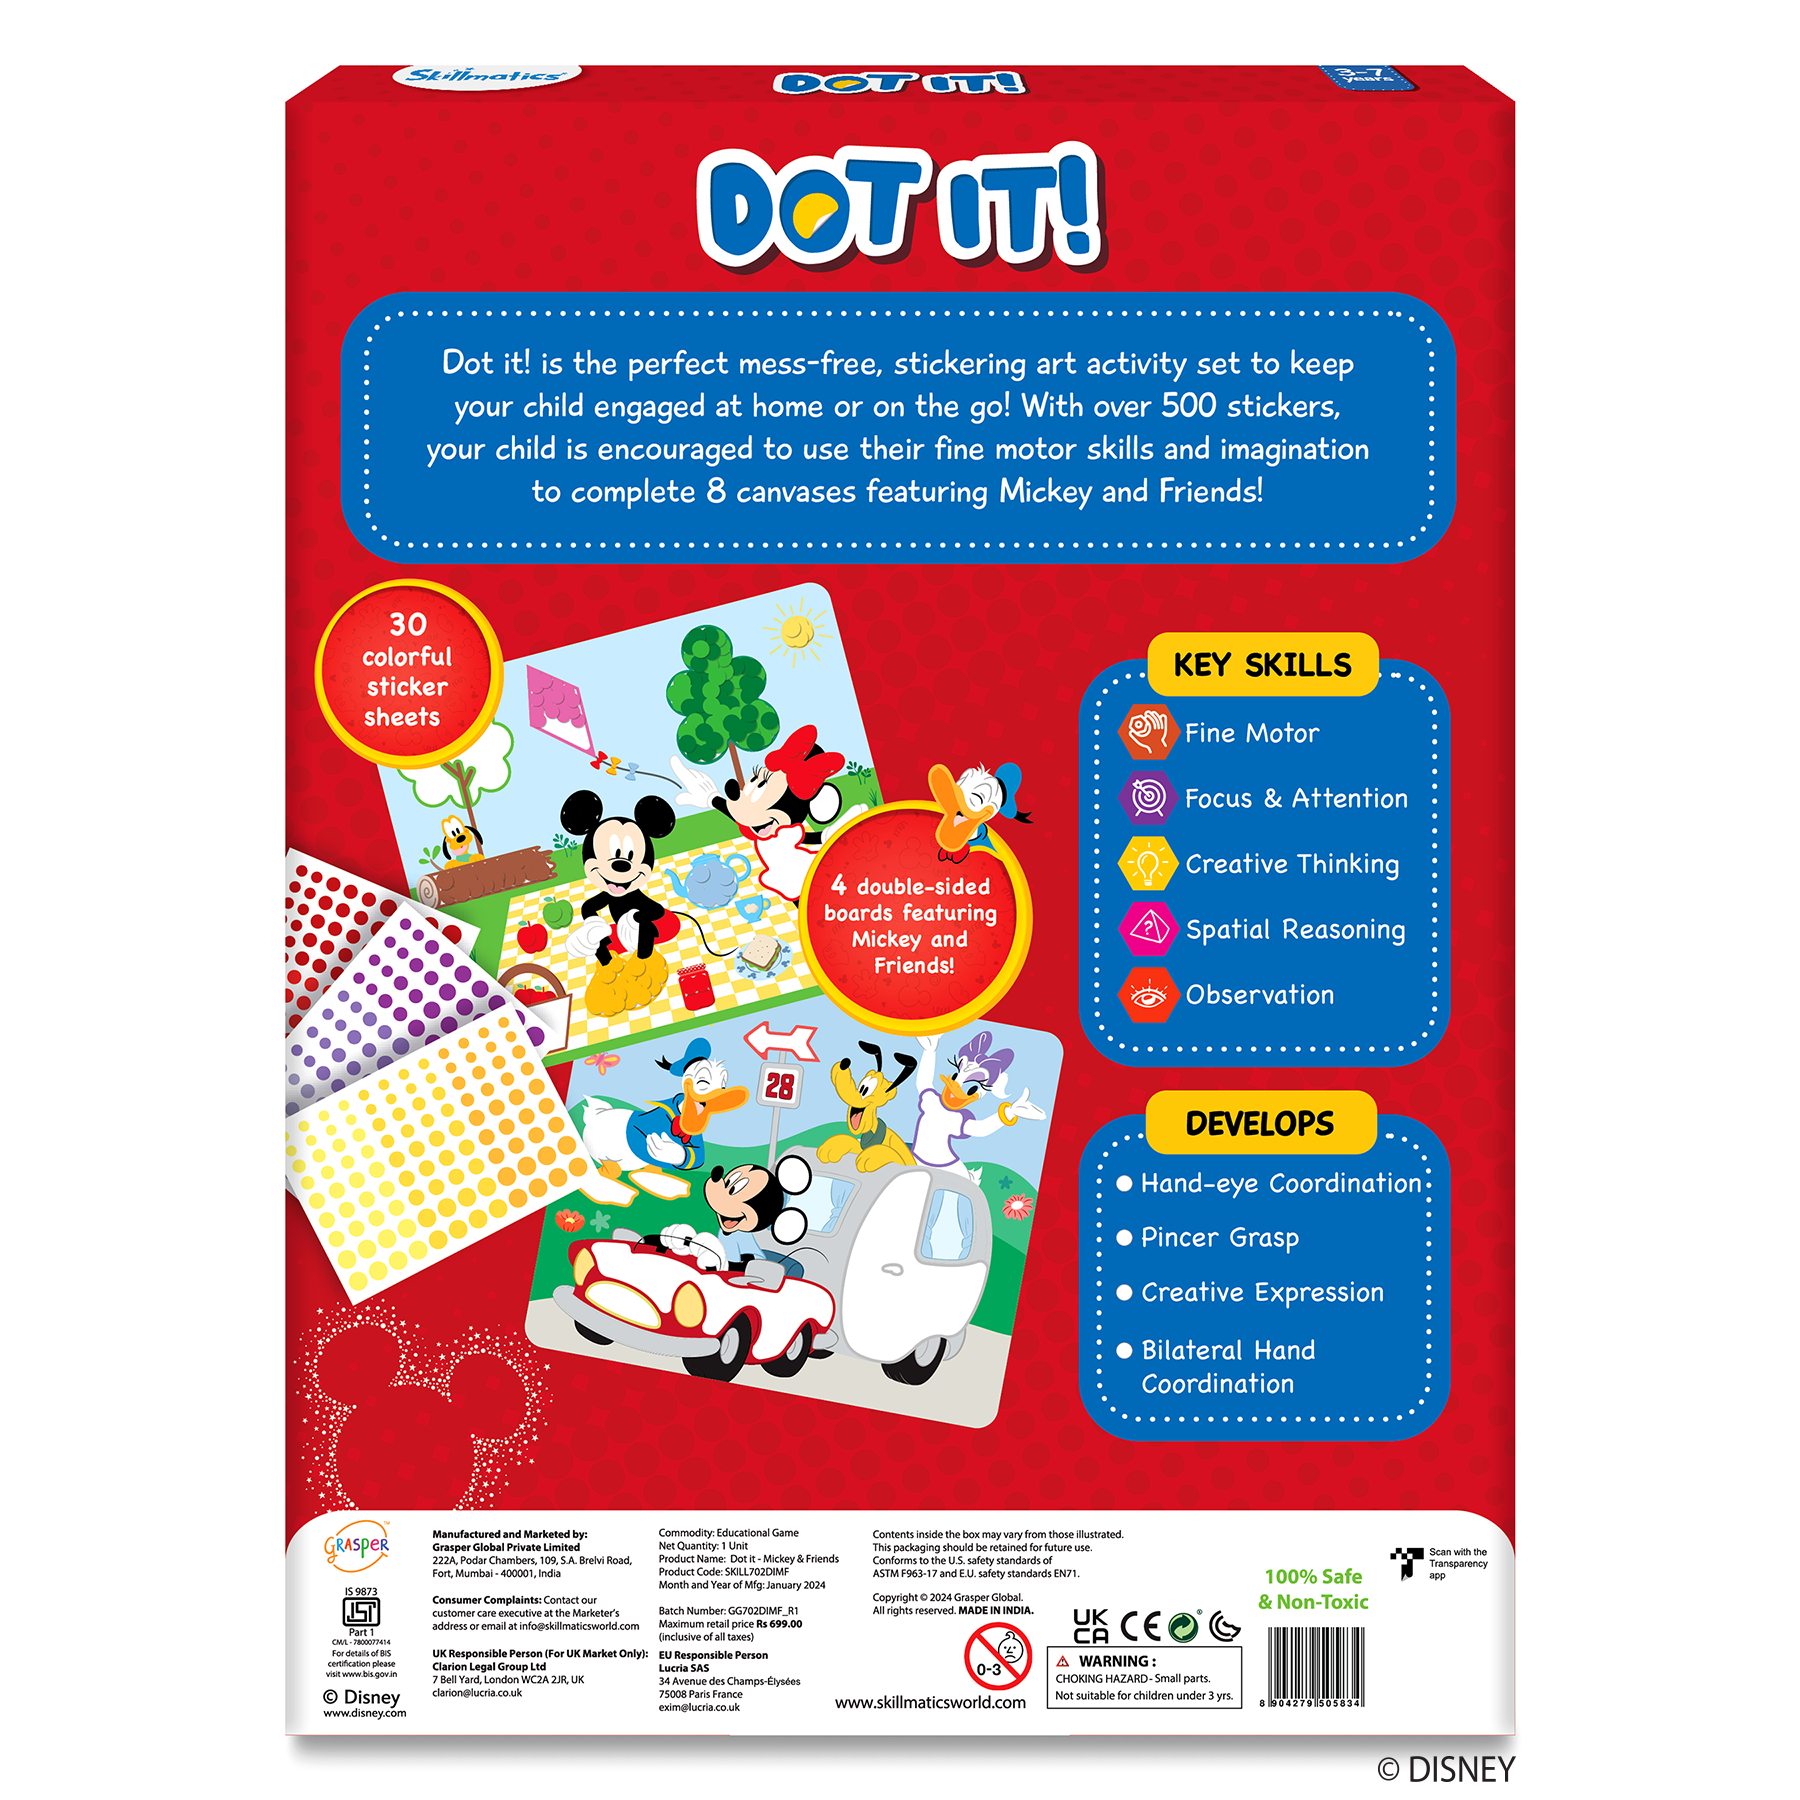 Skillmatics Art Activity - Dot It Mickey and Friends, Mess-Free Sticker Art for Kids, Craft Kits, DIY Activity, Gifts for Boys & Girls Ages 3, 4, 5, 6, 7, Travel Toys for Toddlers